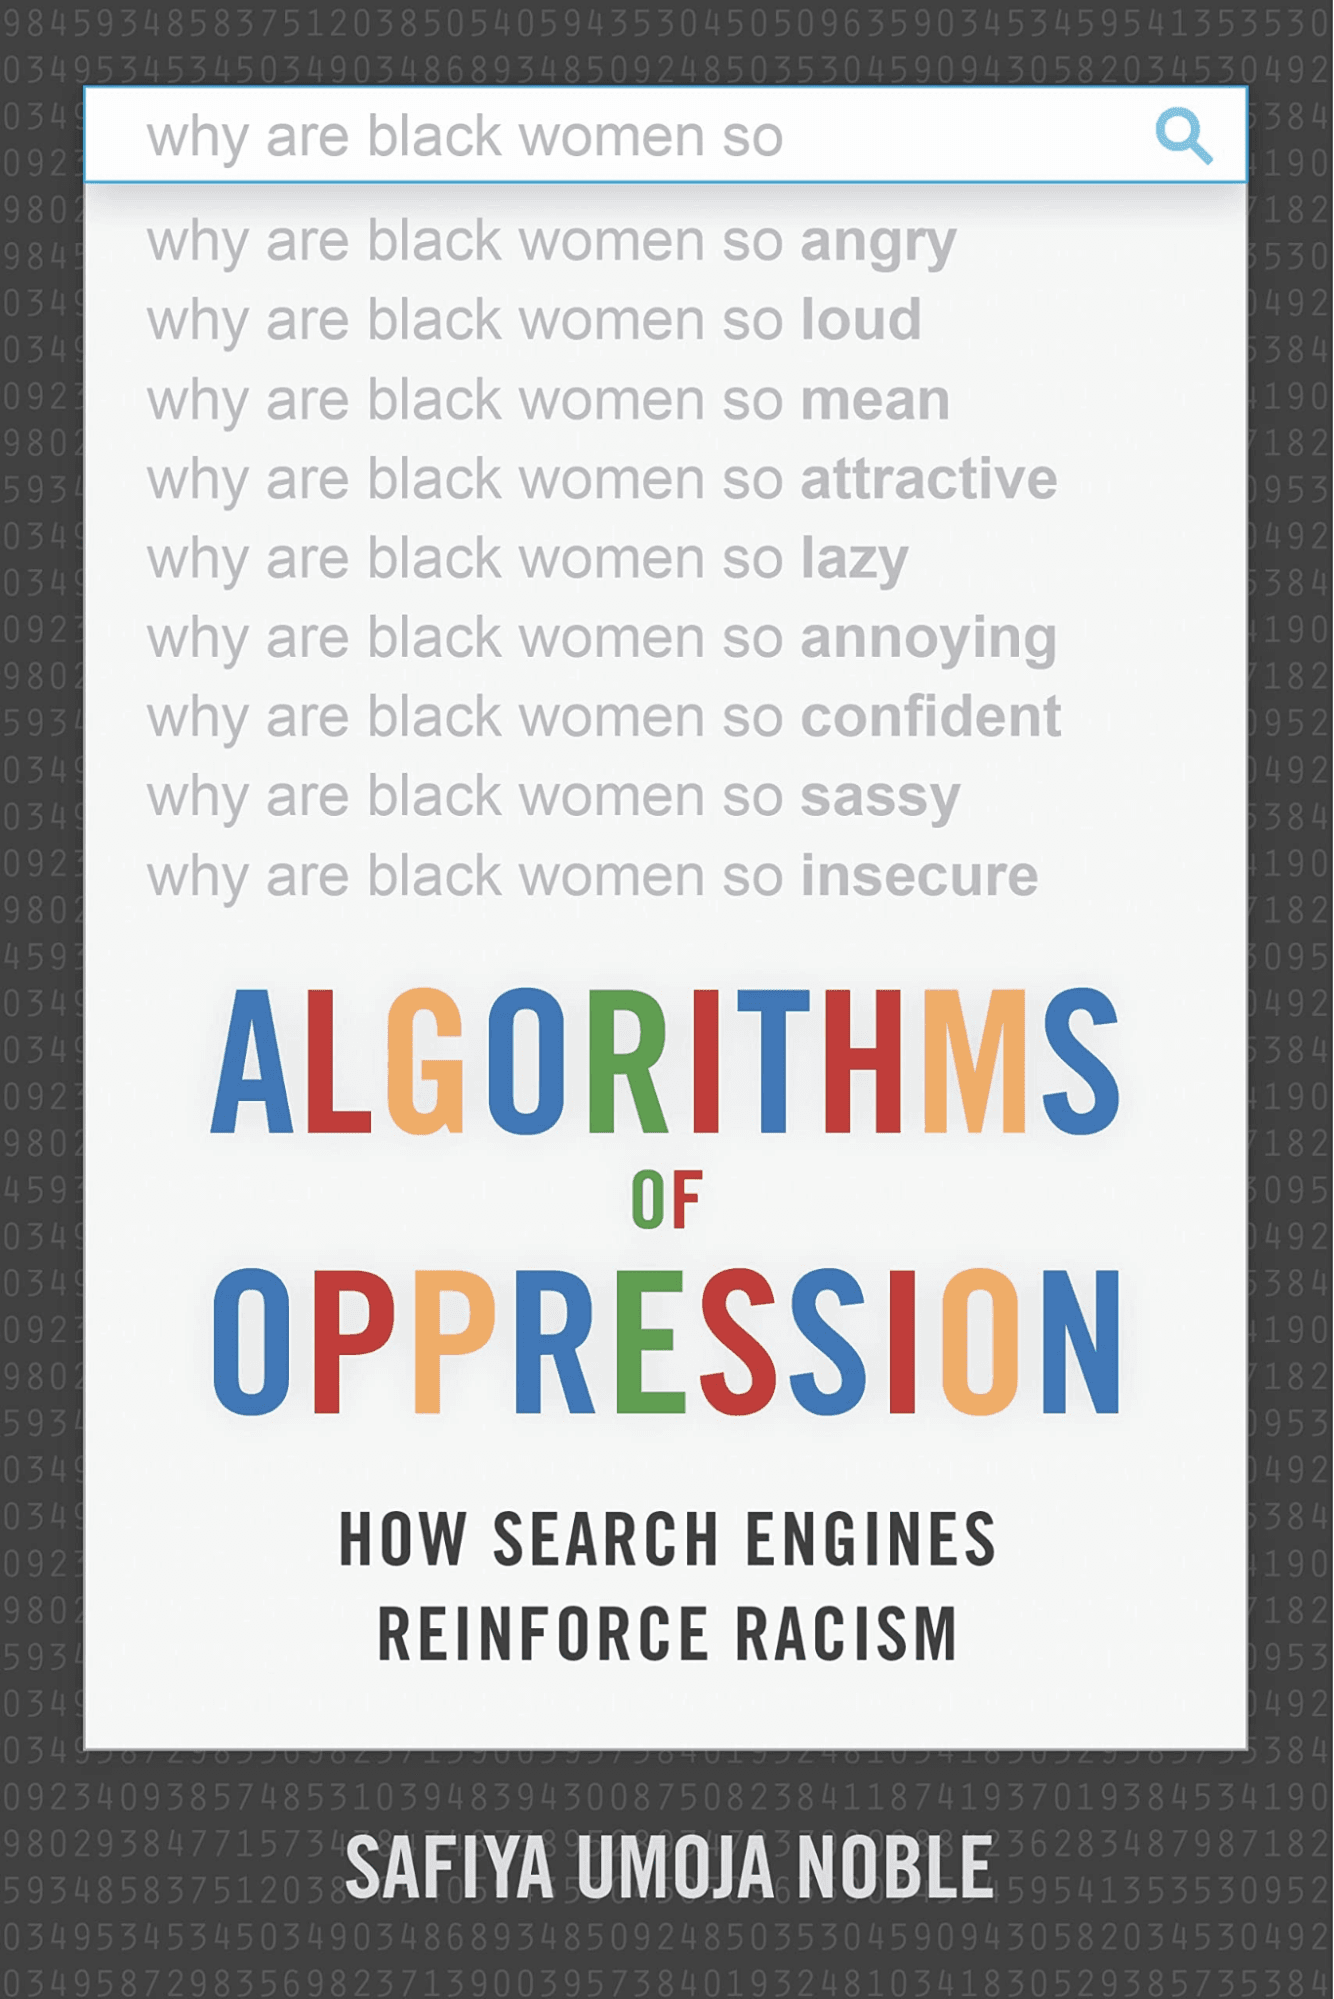 Algorithms of Oppression: How Search Engines Reinforce Racism by Dr. Safiya U. Noble